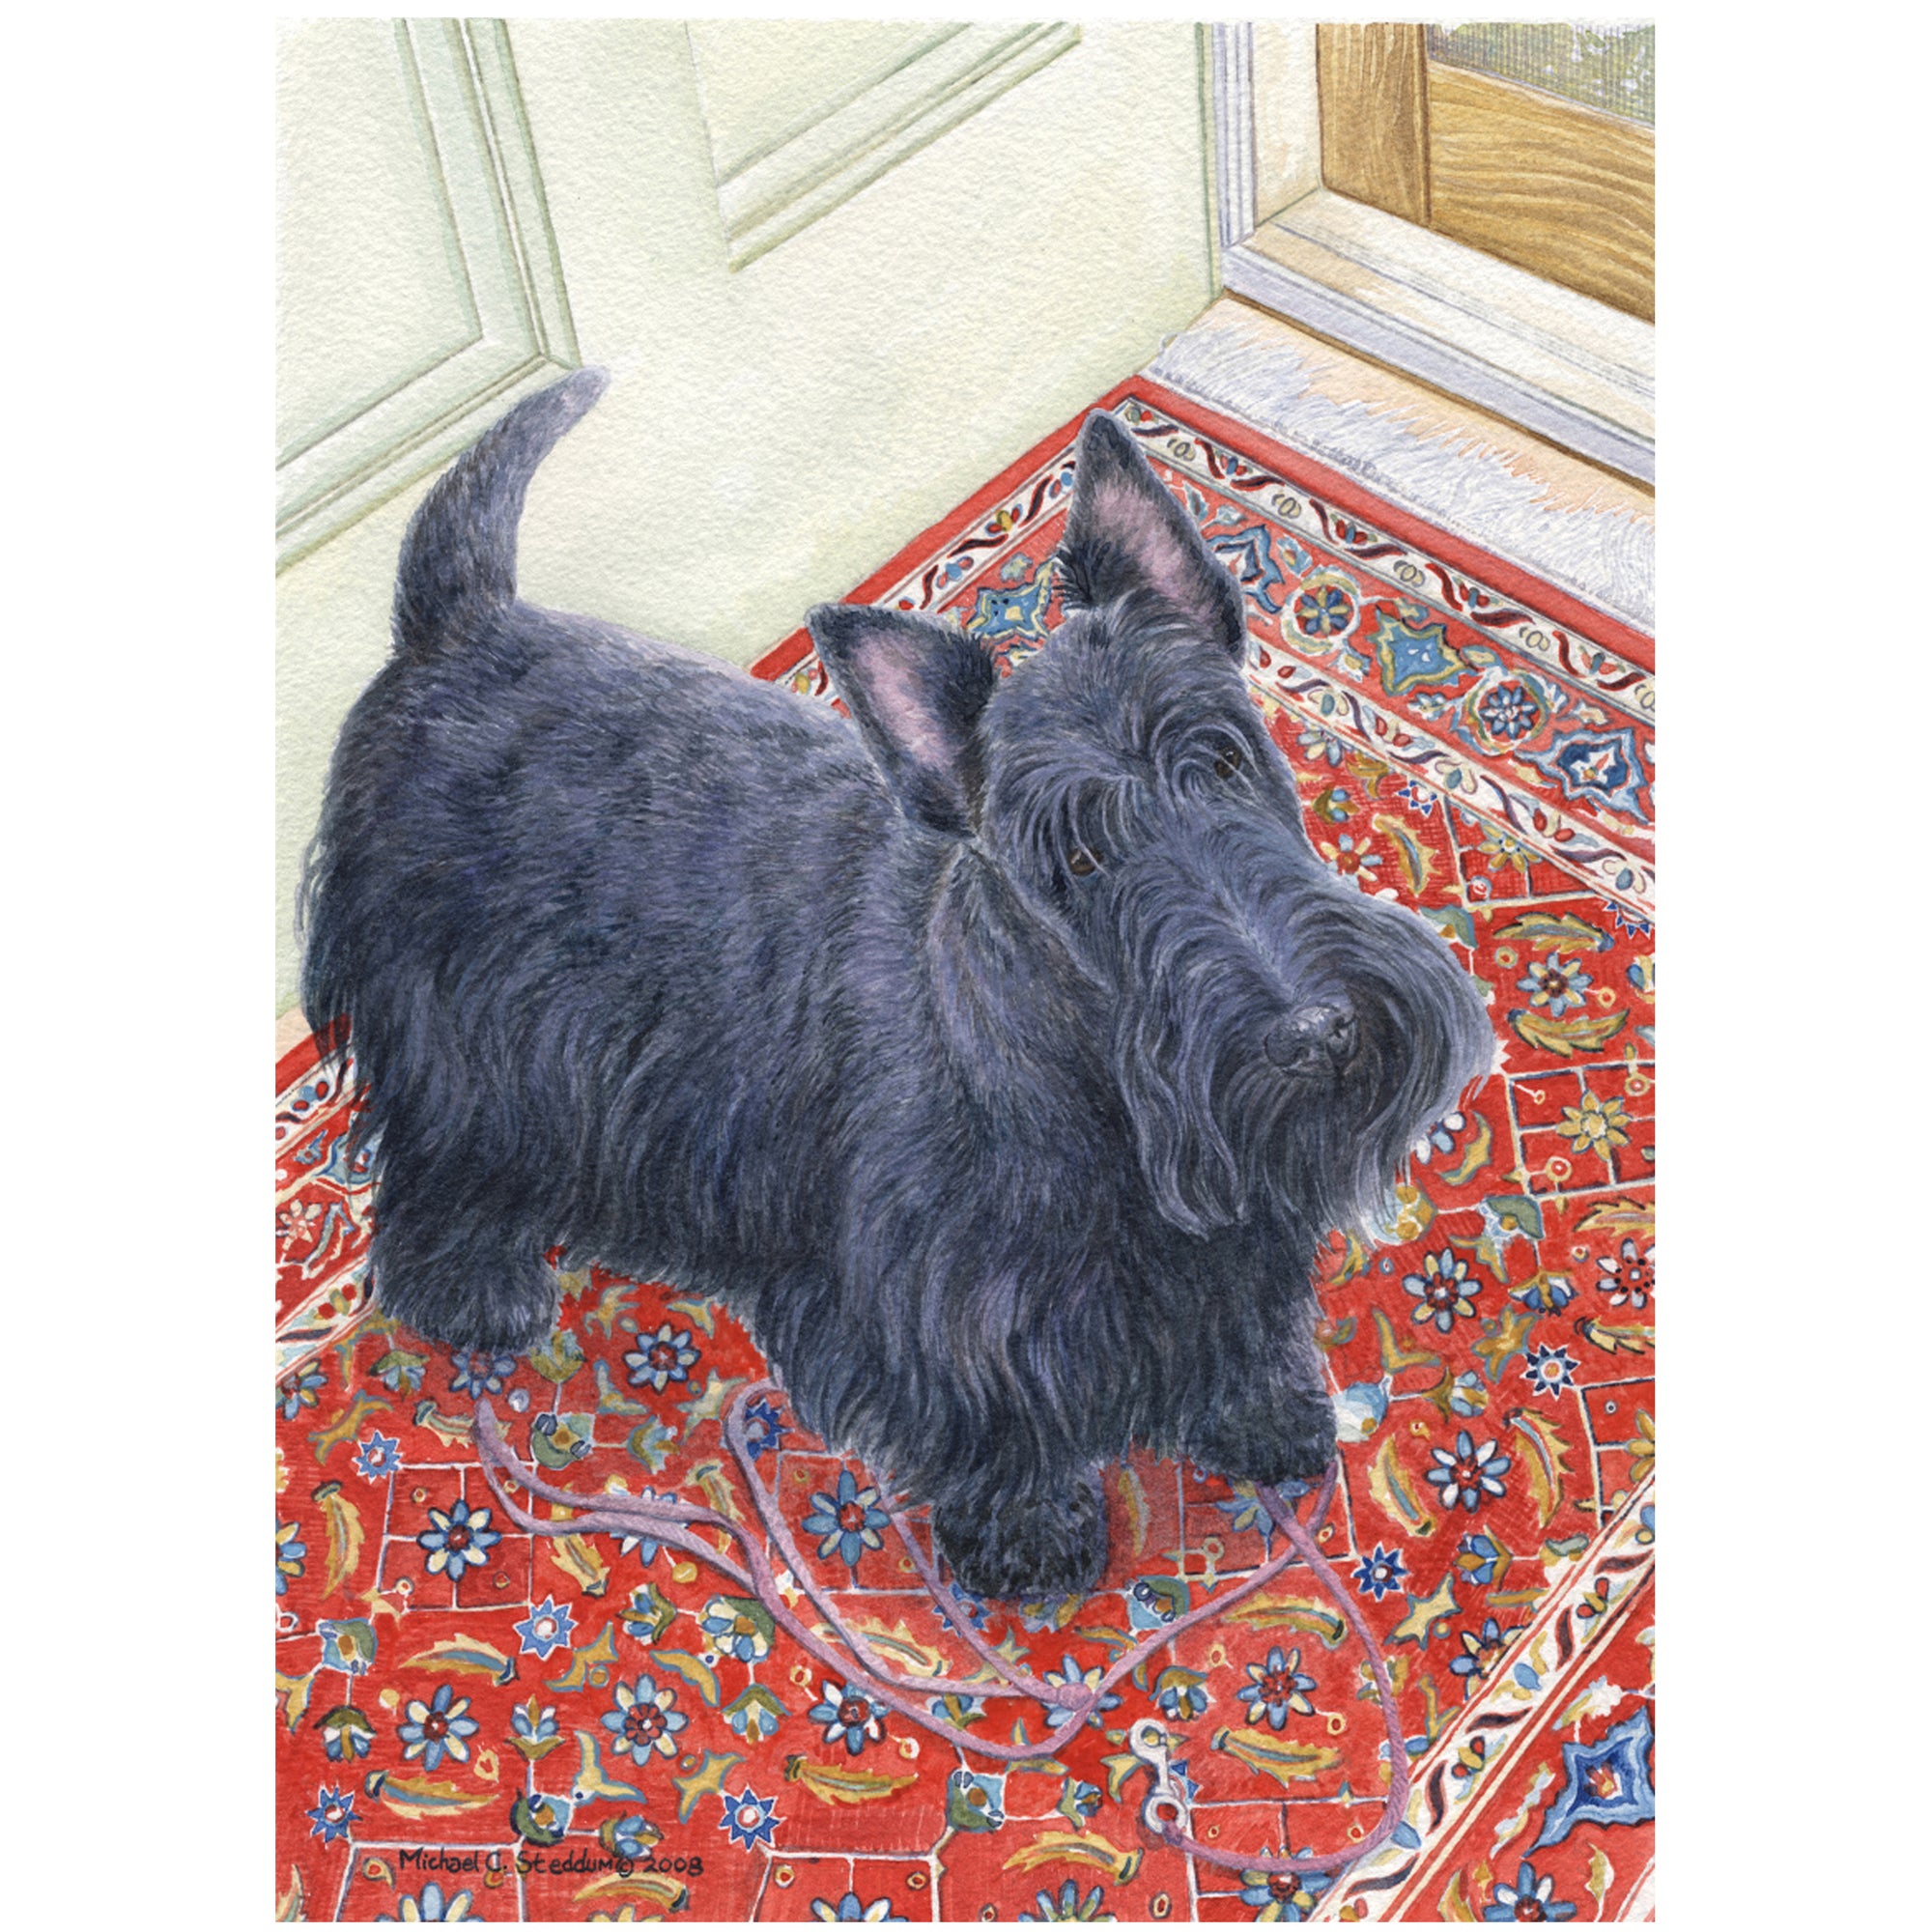 Scottish Terrier Art Reproduction Print - "Walk" by Michael Steddum - Limited Edition Signed and Numbered Scottish Terrier Art Print, Awesome Scottie Gift